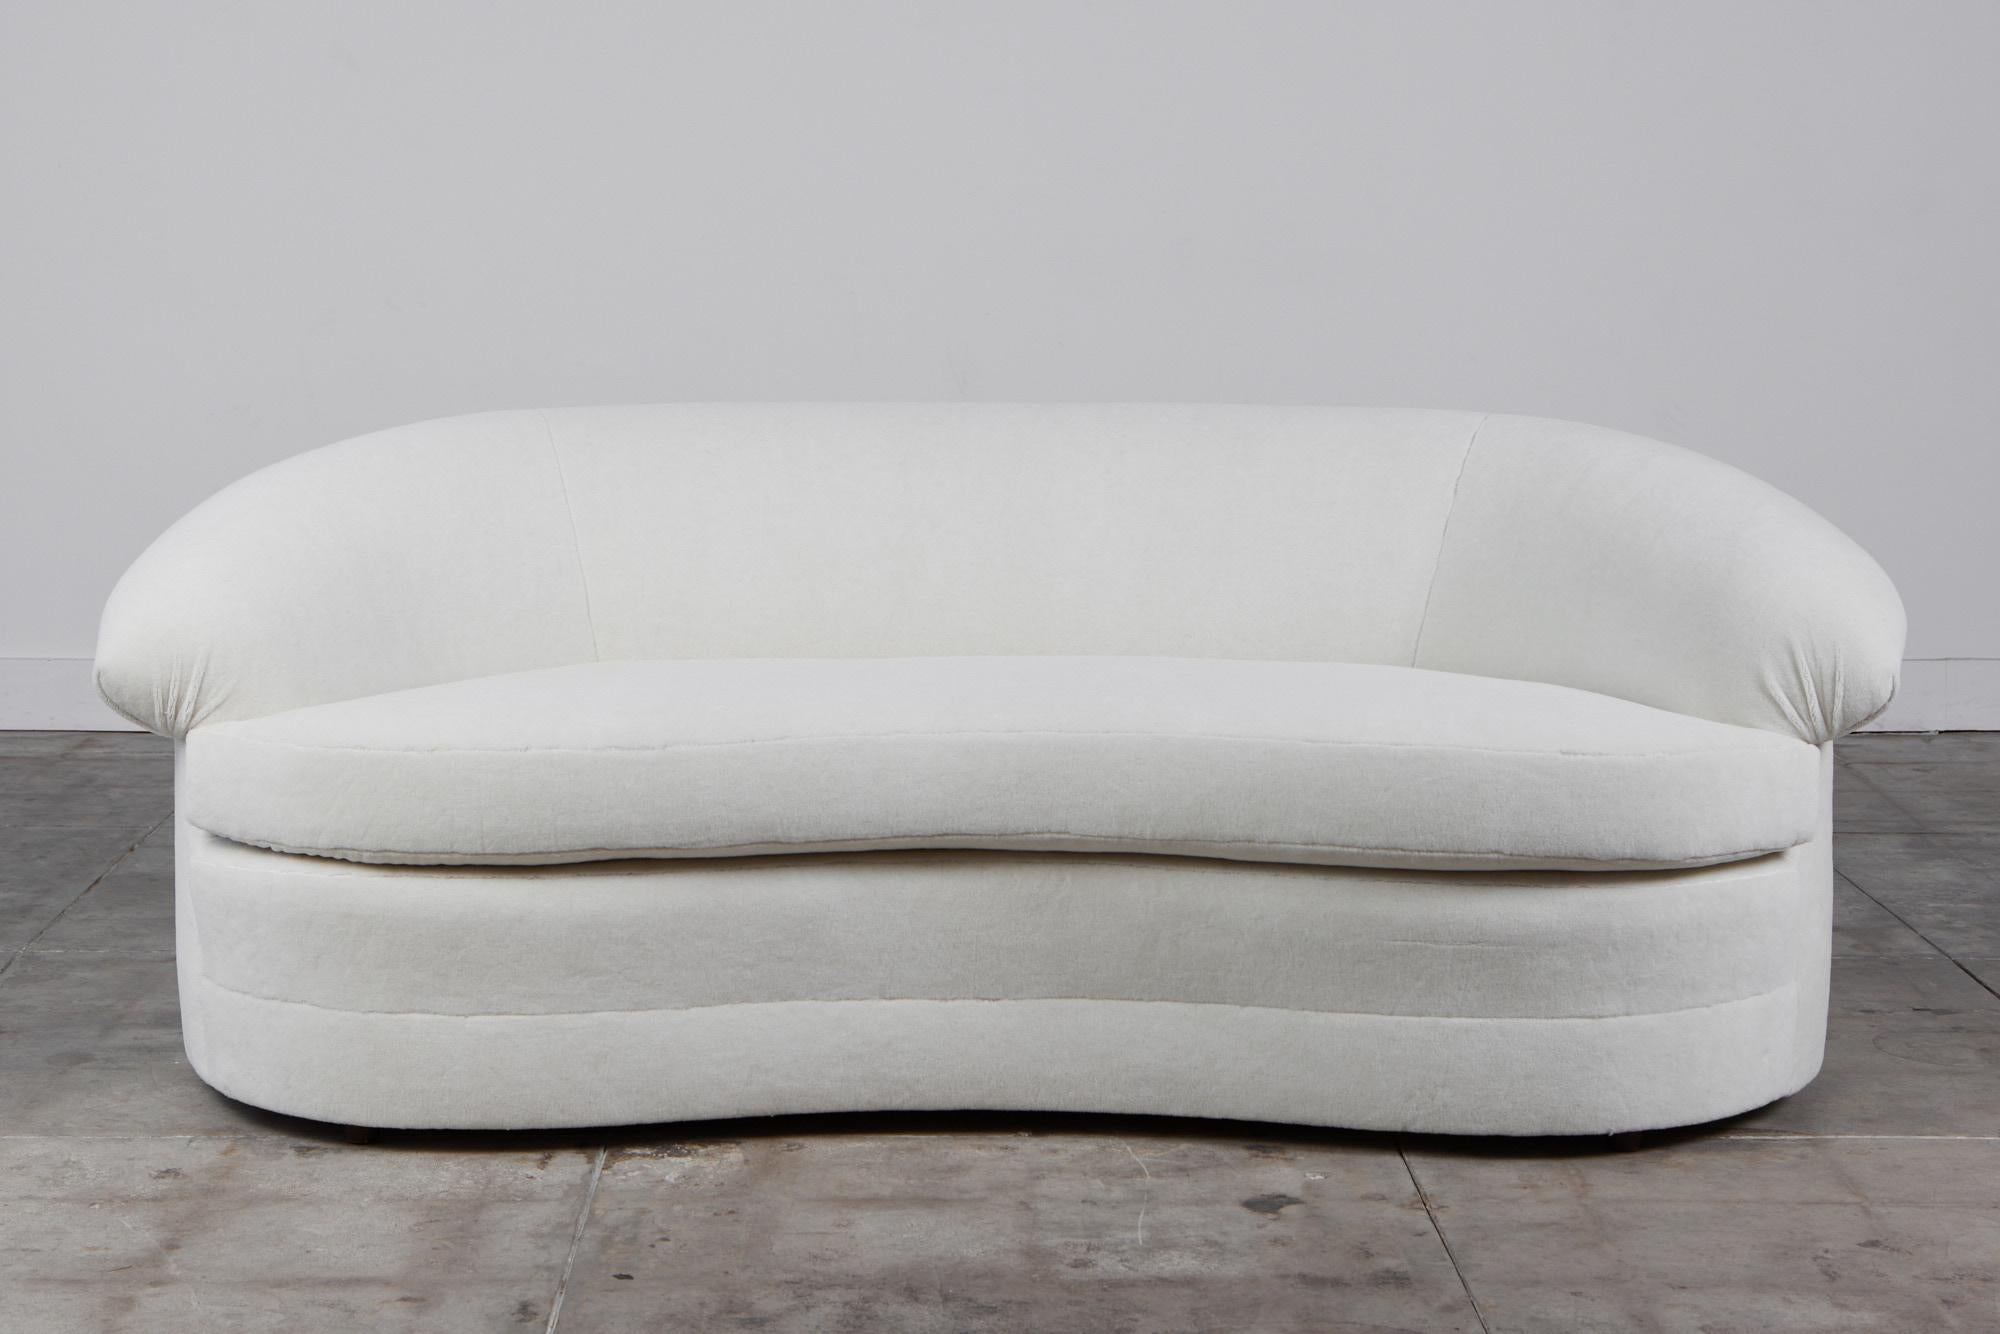 Large curved sofa inspired by Italian mid-century design, USA, c.1980s. Its sensuous curves and voluptuous shape makes it a statement piece in any interior. It is upholstered in a beautiful high pile Italian velvet alpaca. The deep seating along